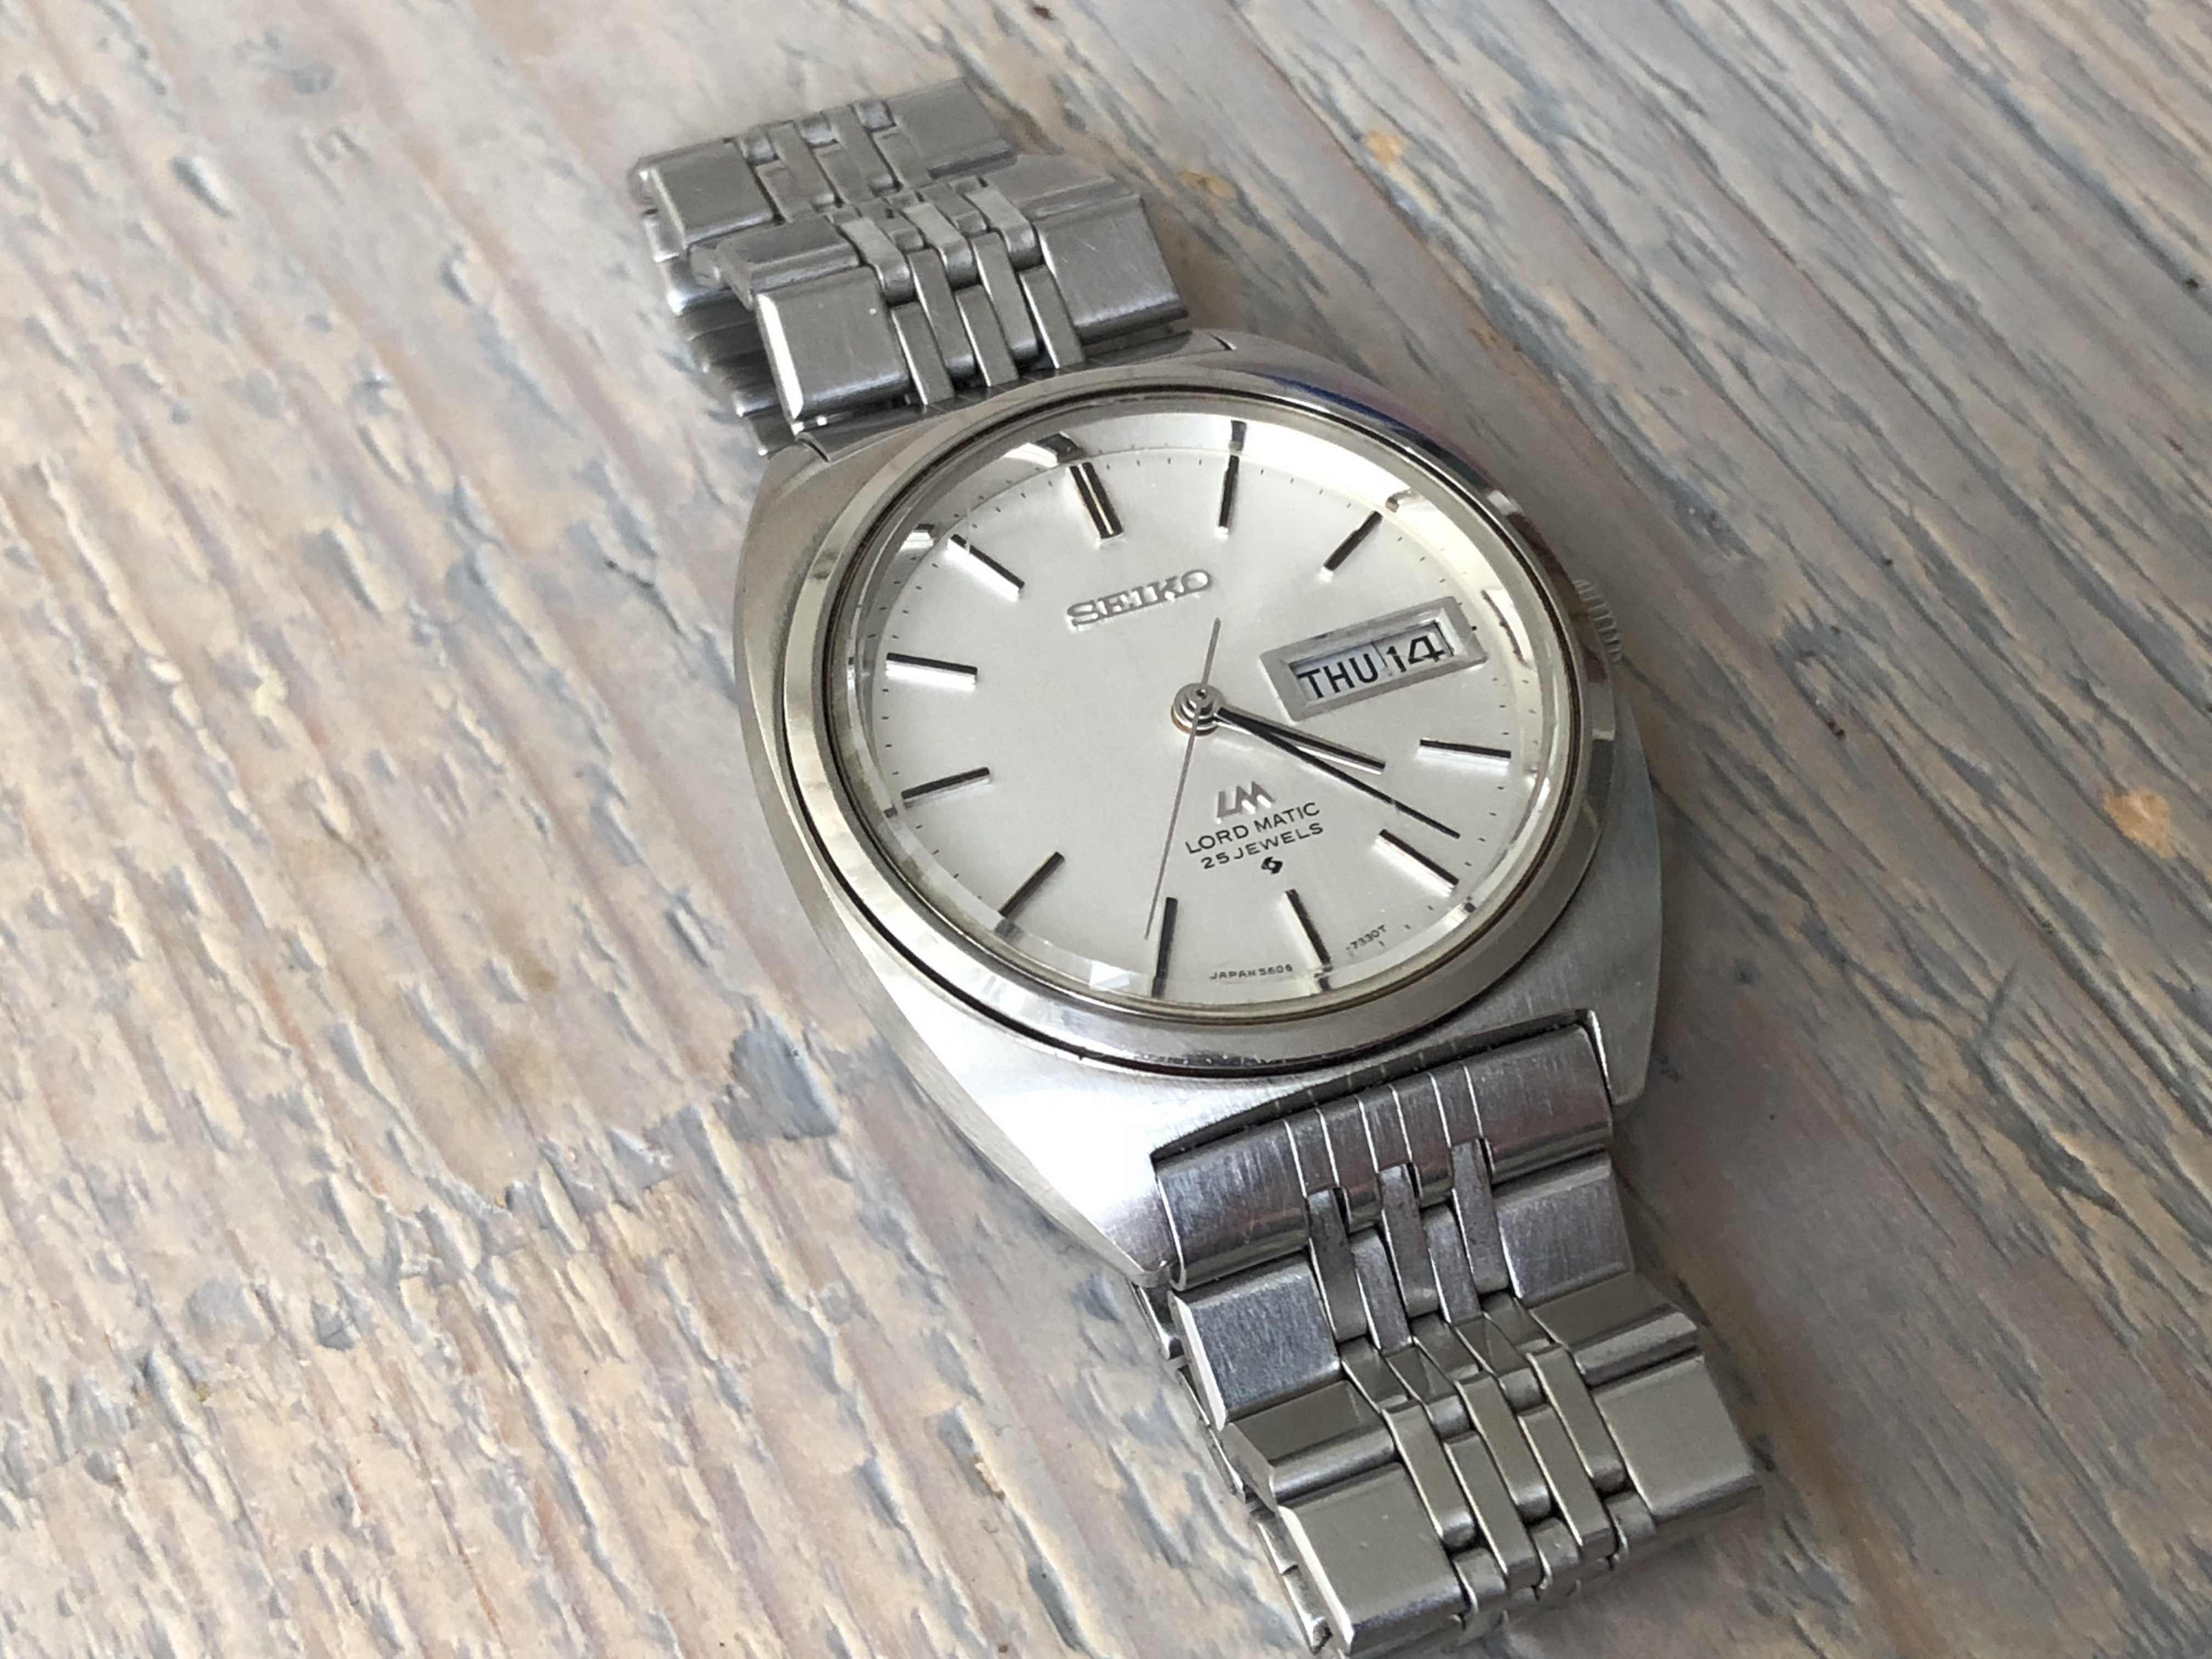 Seiko 5606 25 Jewels | vlr.eng.br